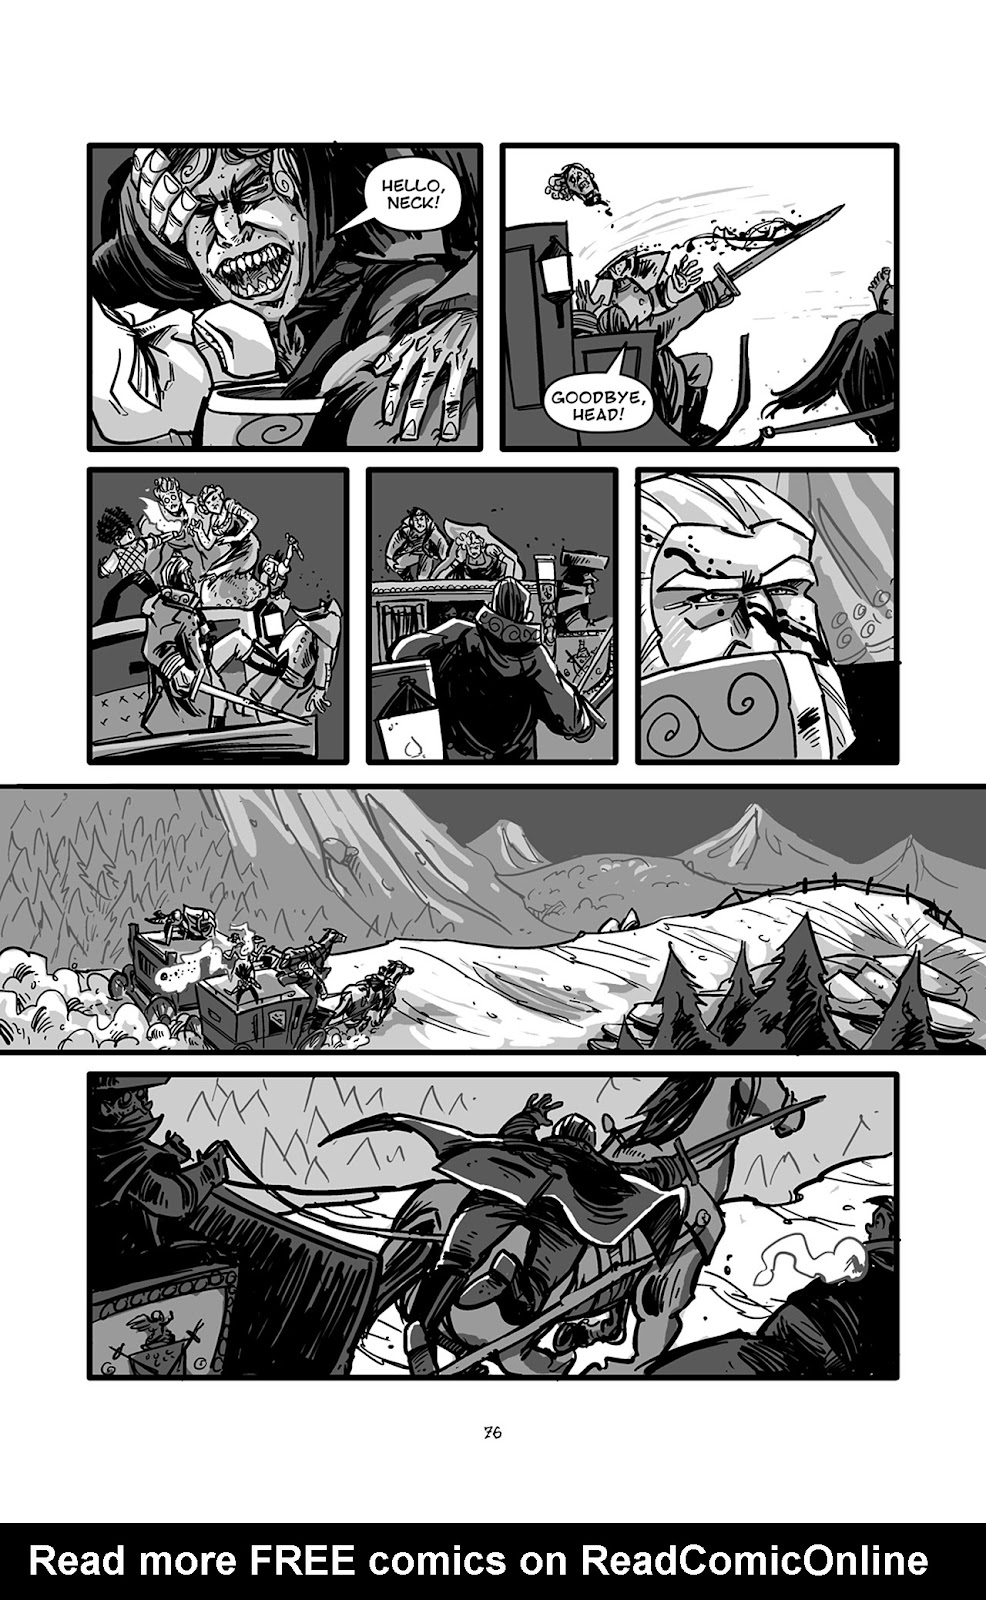 Pinocchio: Vampire Slayer - Of Wood and Blood issue 4 - Page 3